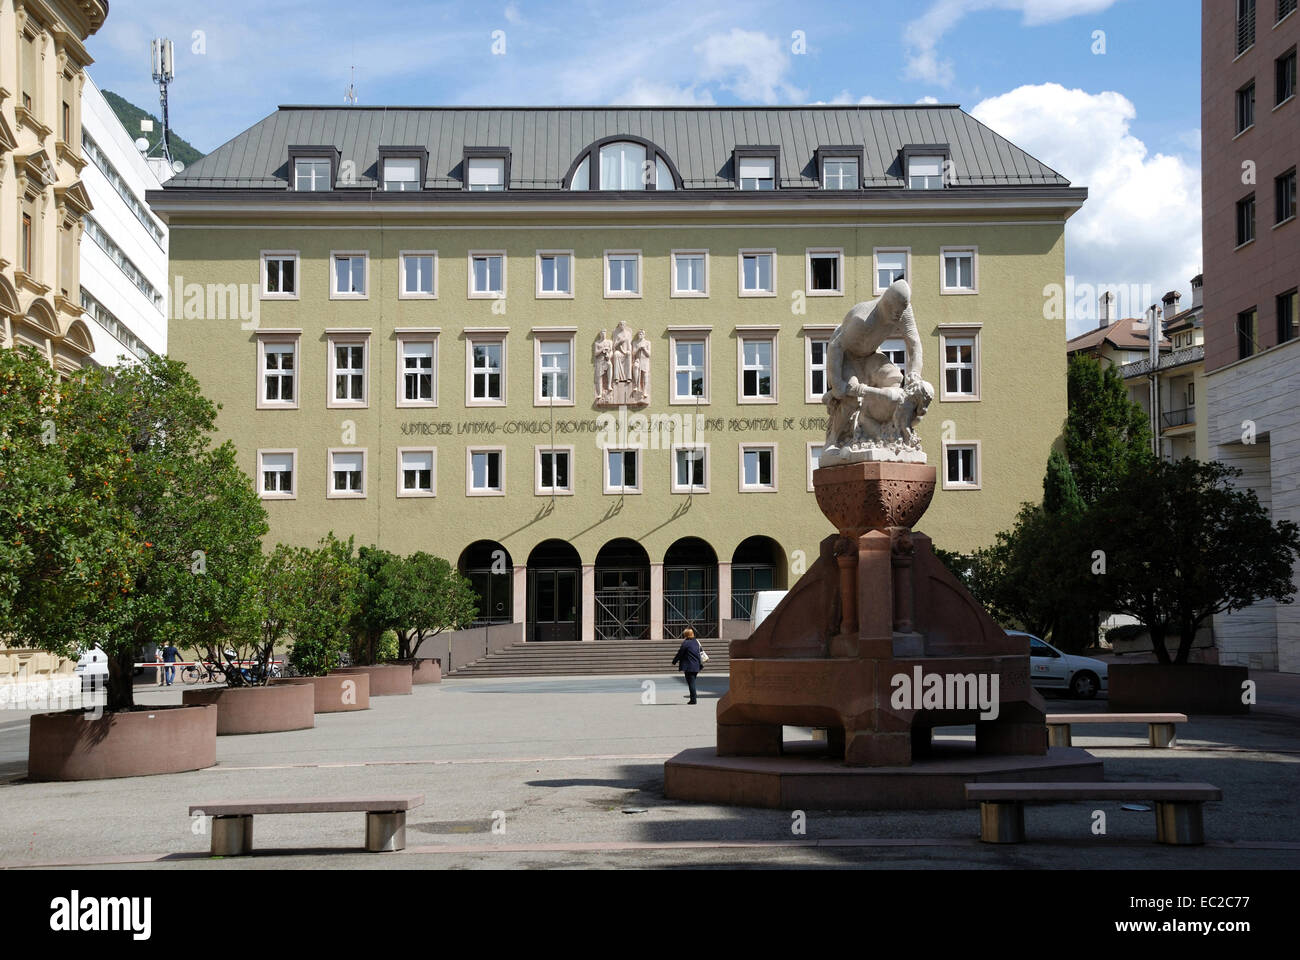 Landtag building the independents' province South Tyrol in Bolzano. Stock Photo